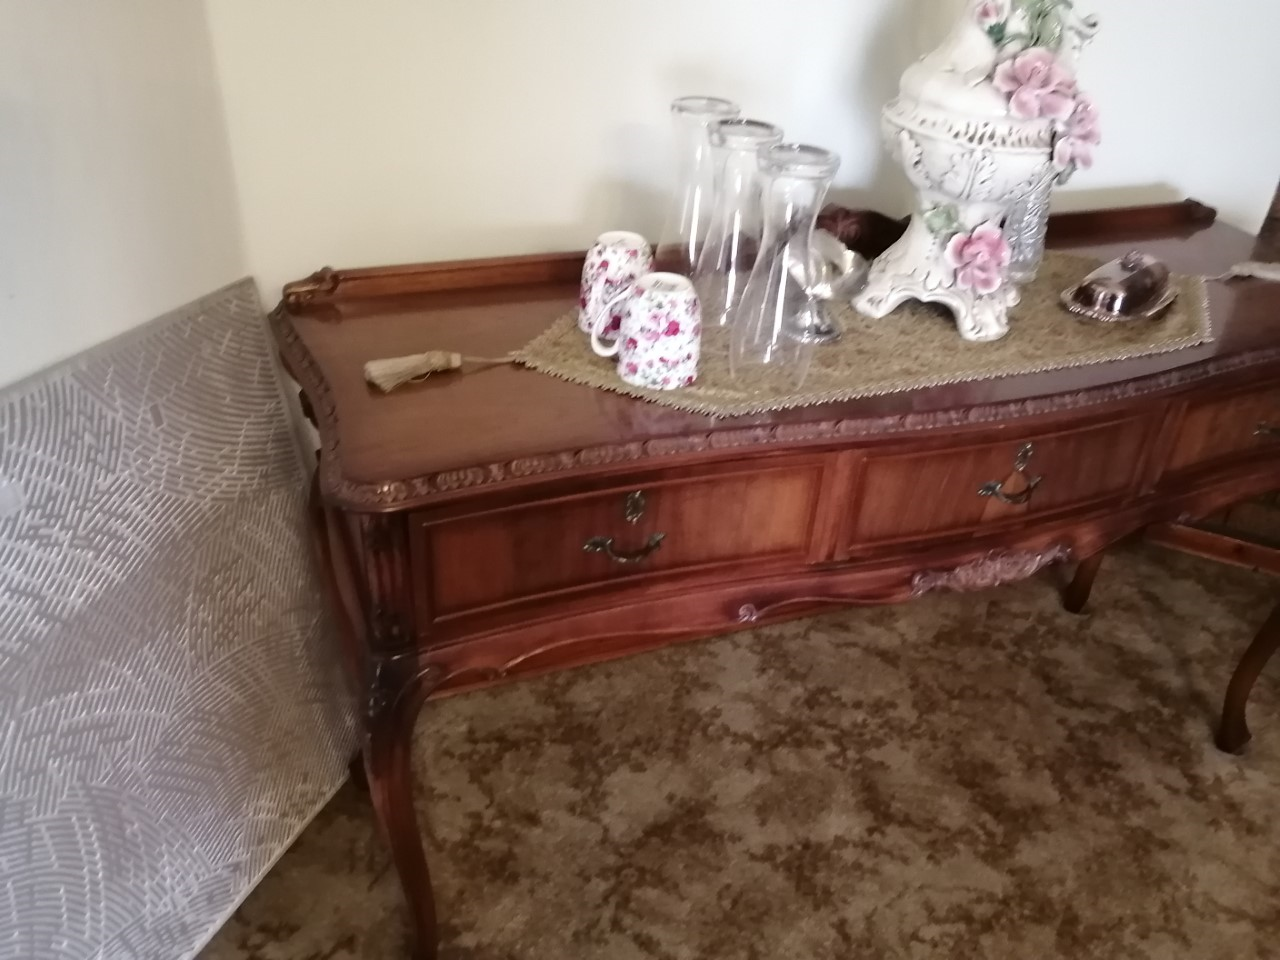  Rosewood table and chairs